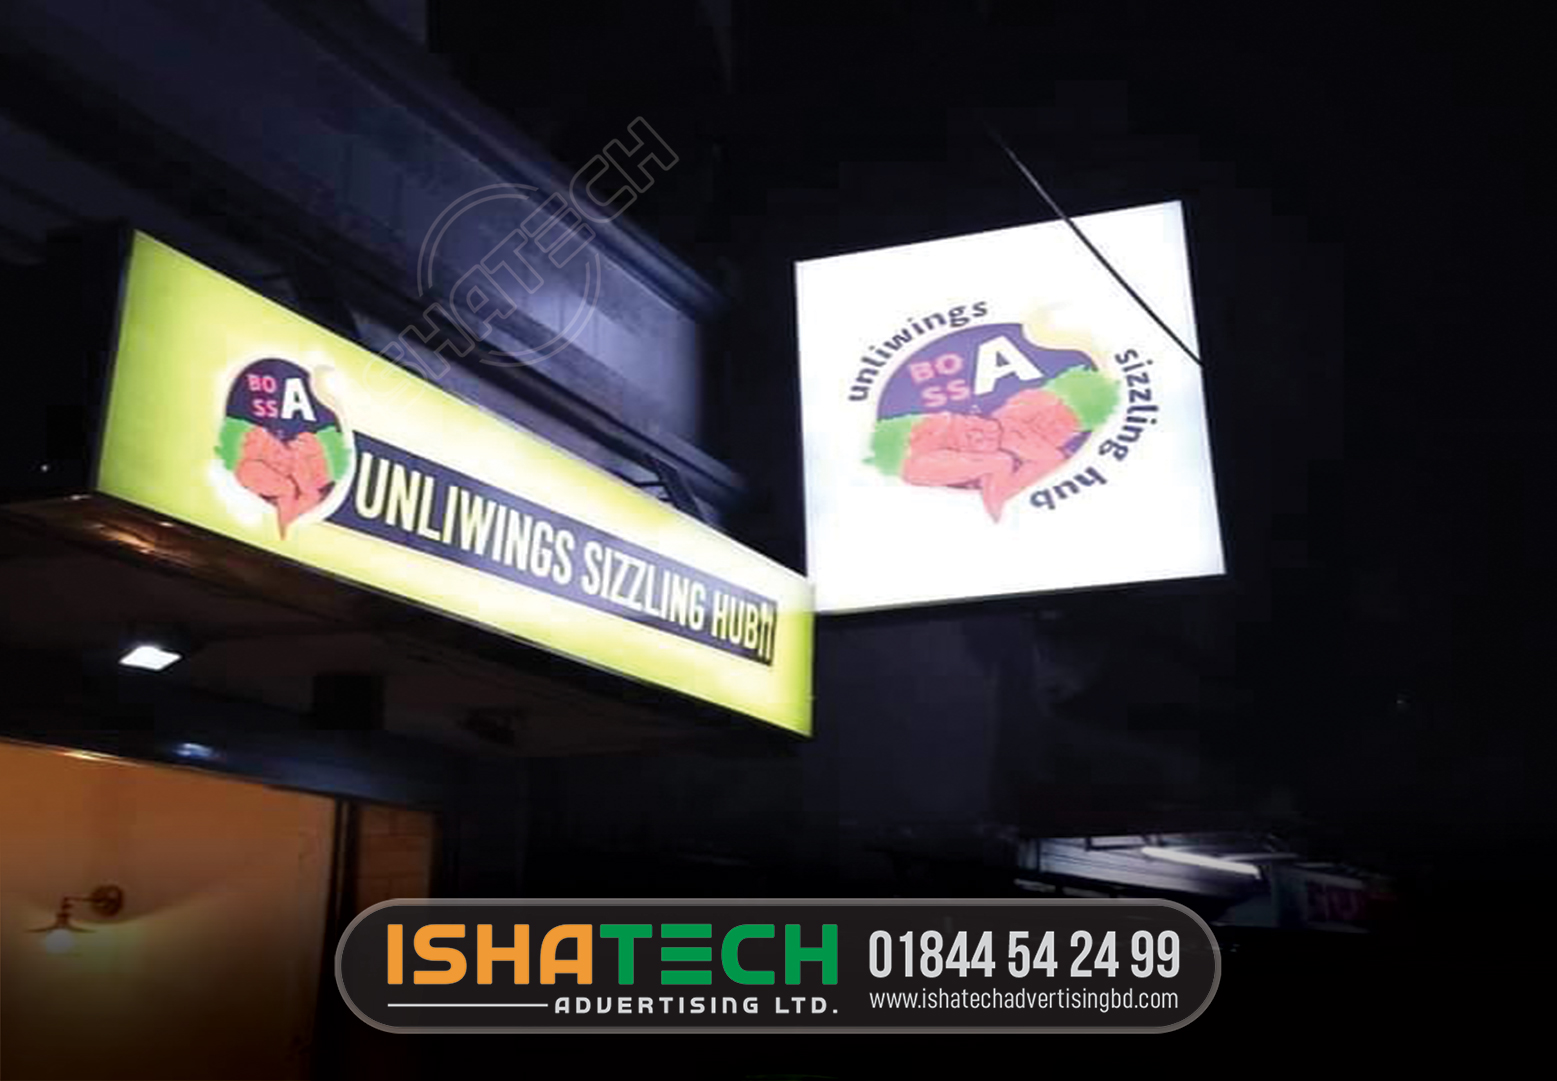 UNIWINGS SIZZLING PANA PROFILE SIGNAGE BD, RESTAURANT FRONT SIGNBOARD AND BILLBOARD MAKING BD